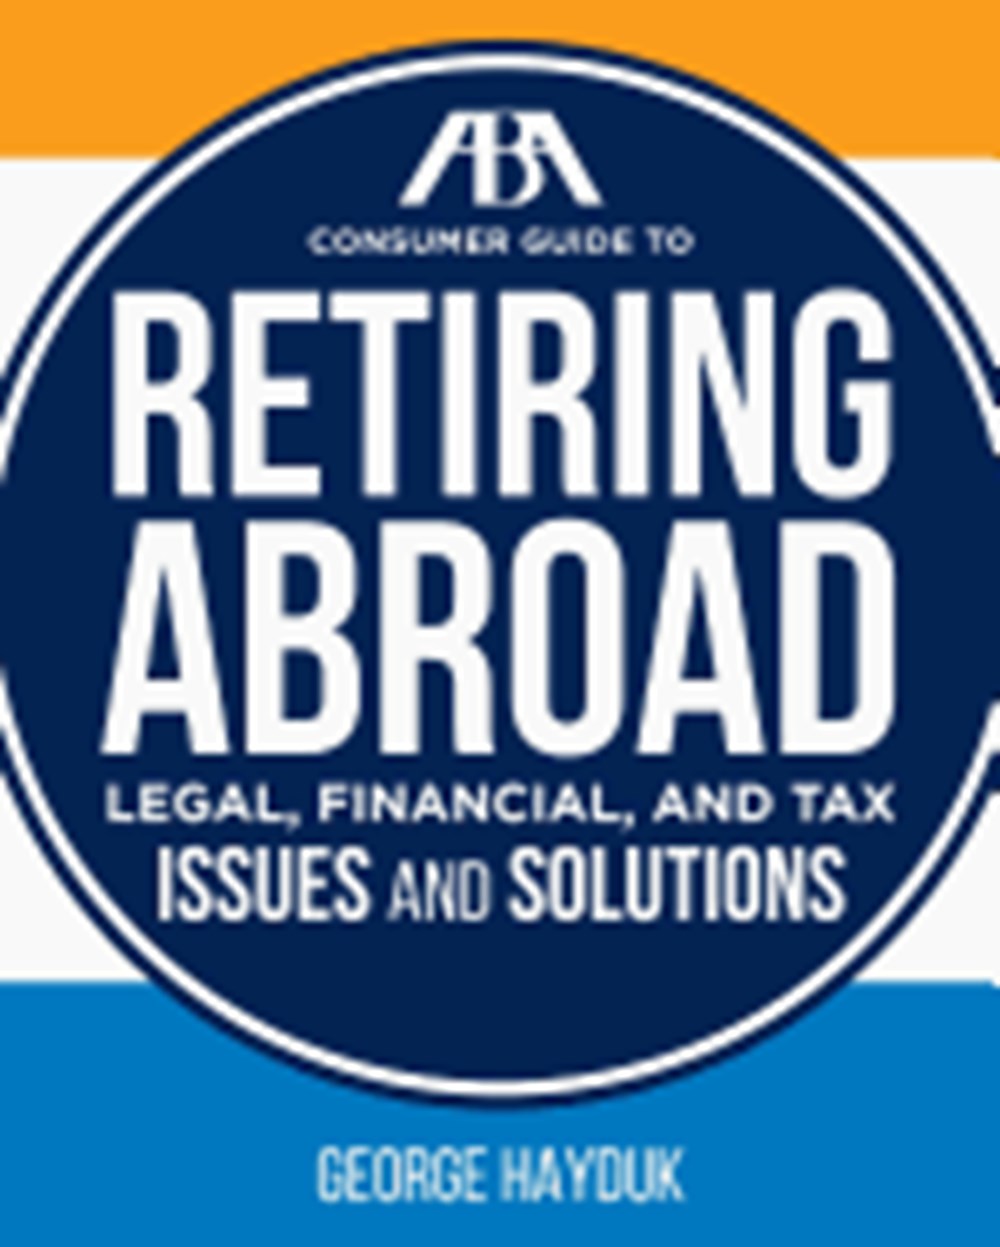 ABA Consumer Guide to Retiring Abroad: Legal, Financial, and Tax Issues and Solutions